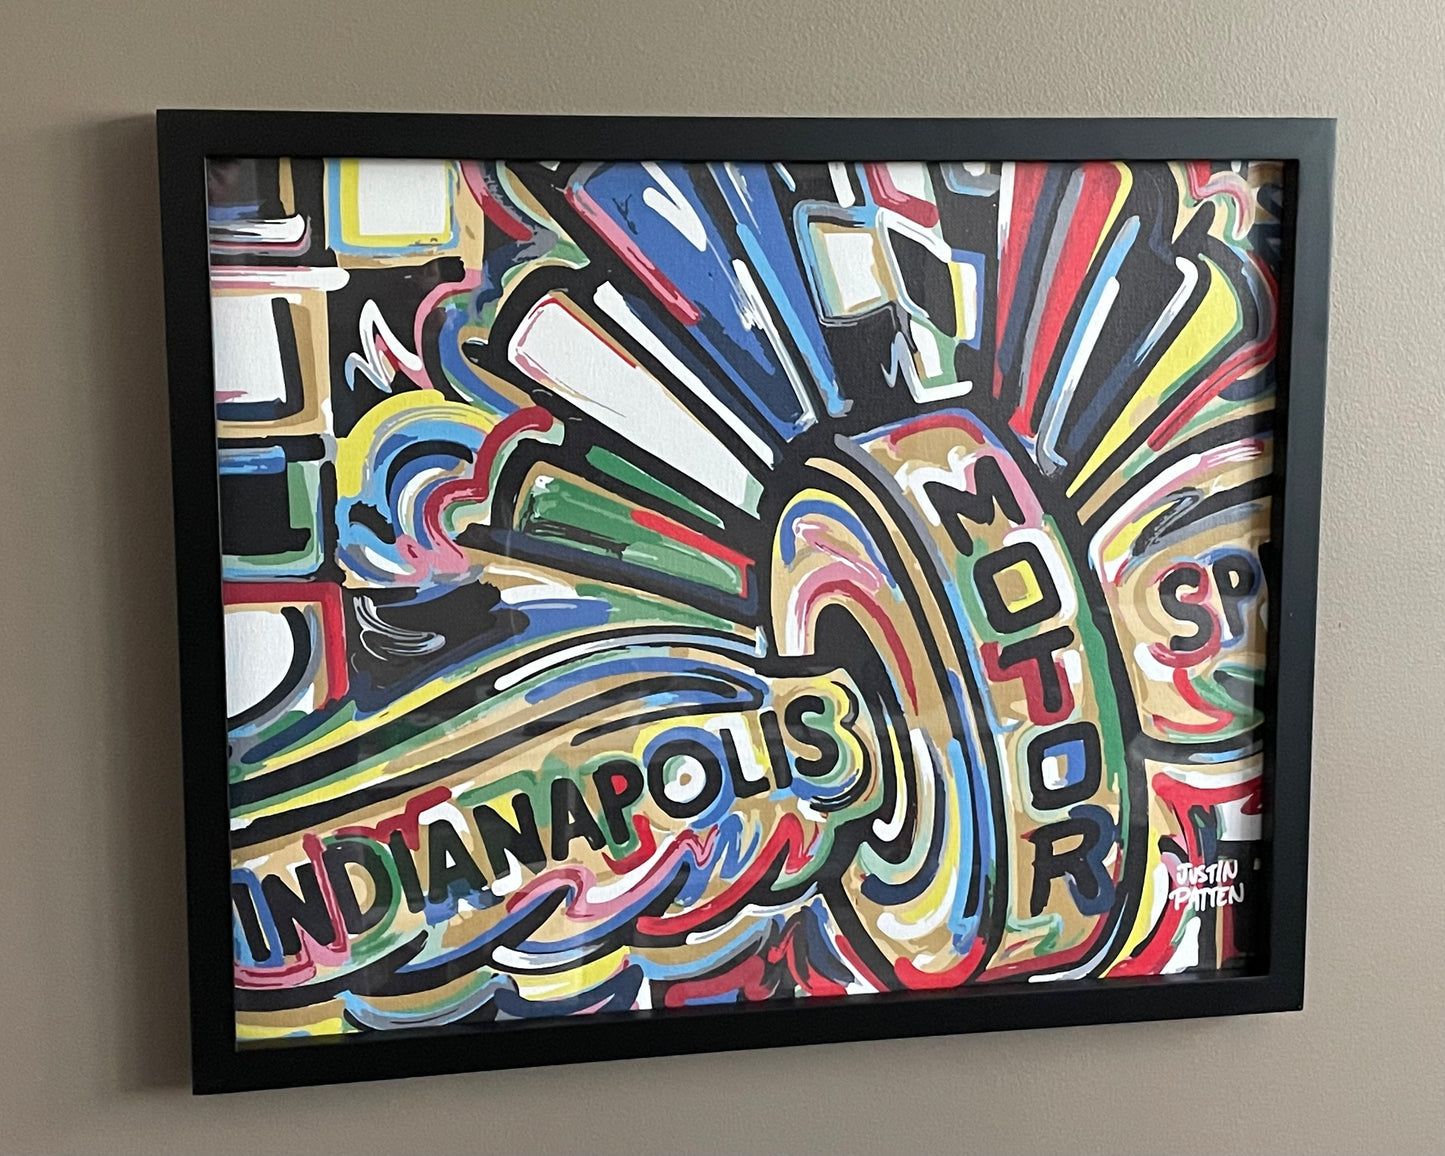 Indianapolis Motor Speedway 20"x16" Angle Print by Justin Patten